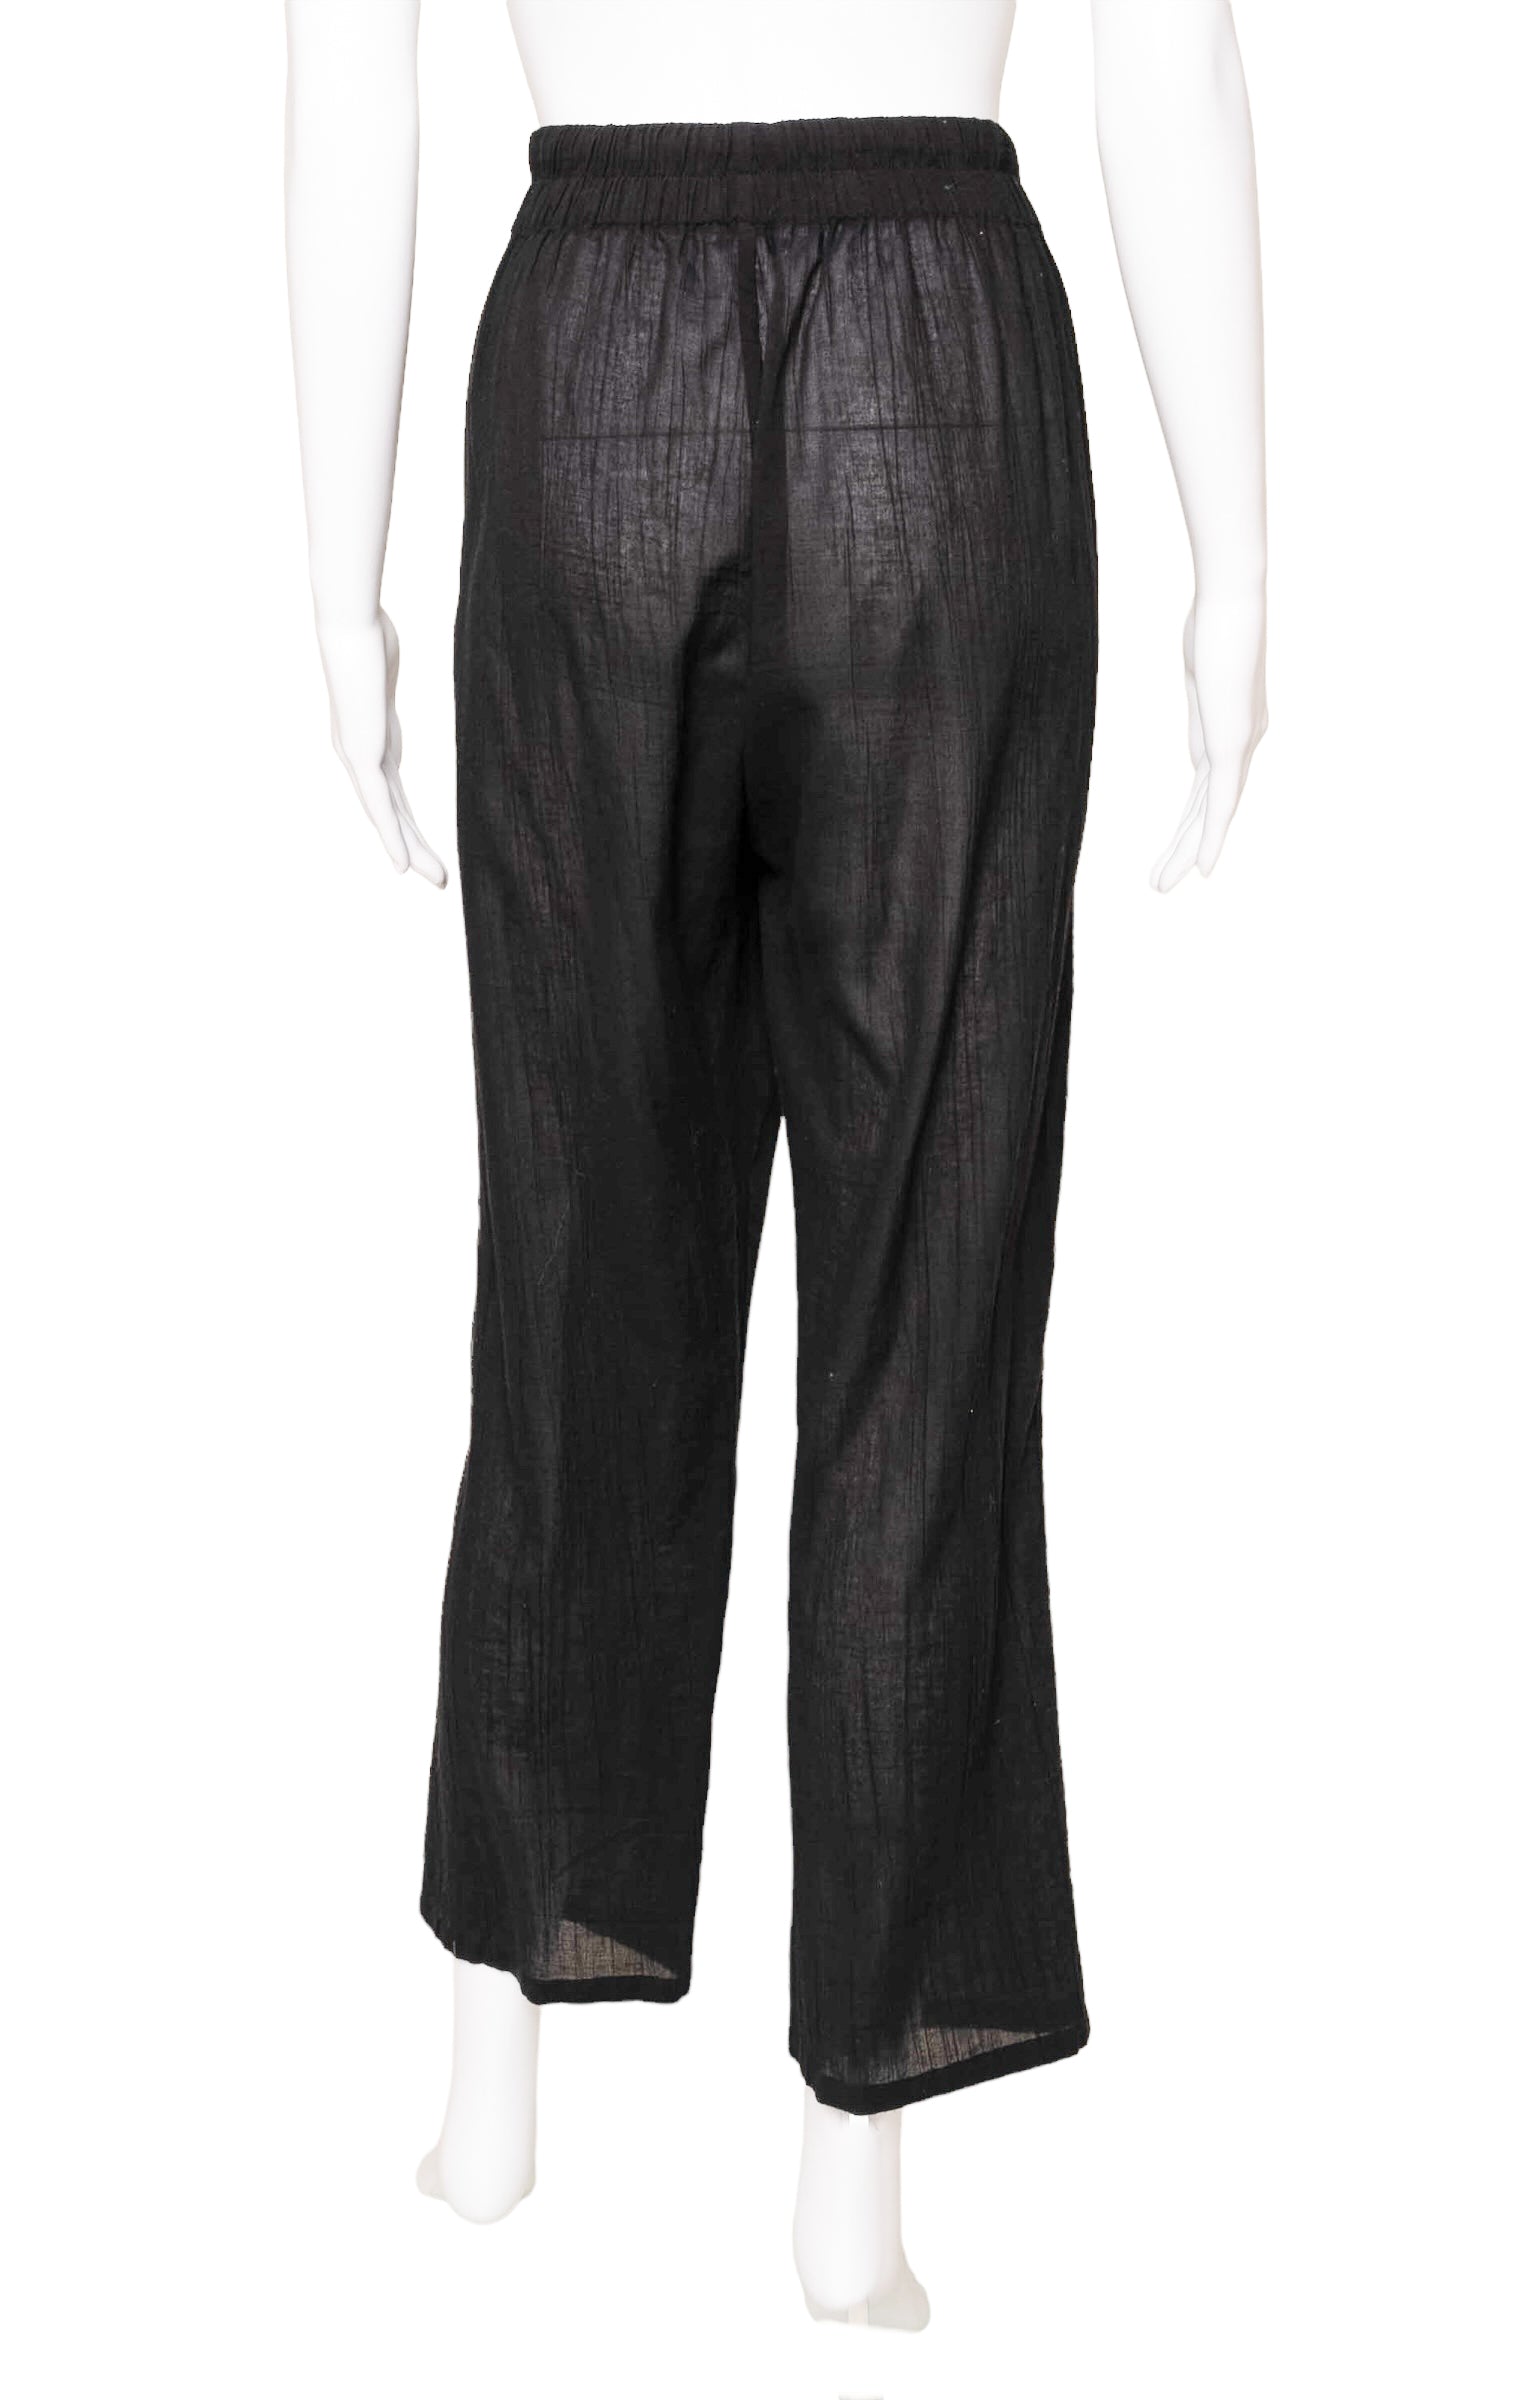 JAMES PERSE Pants Size: Marked a size 3, fits like L